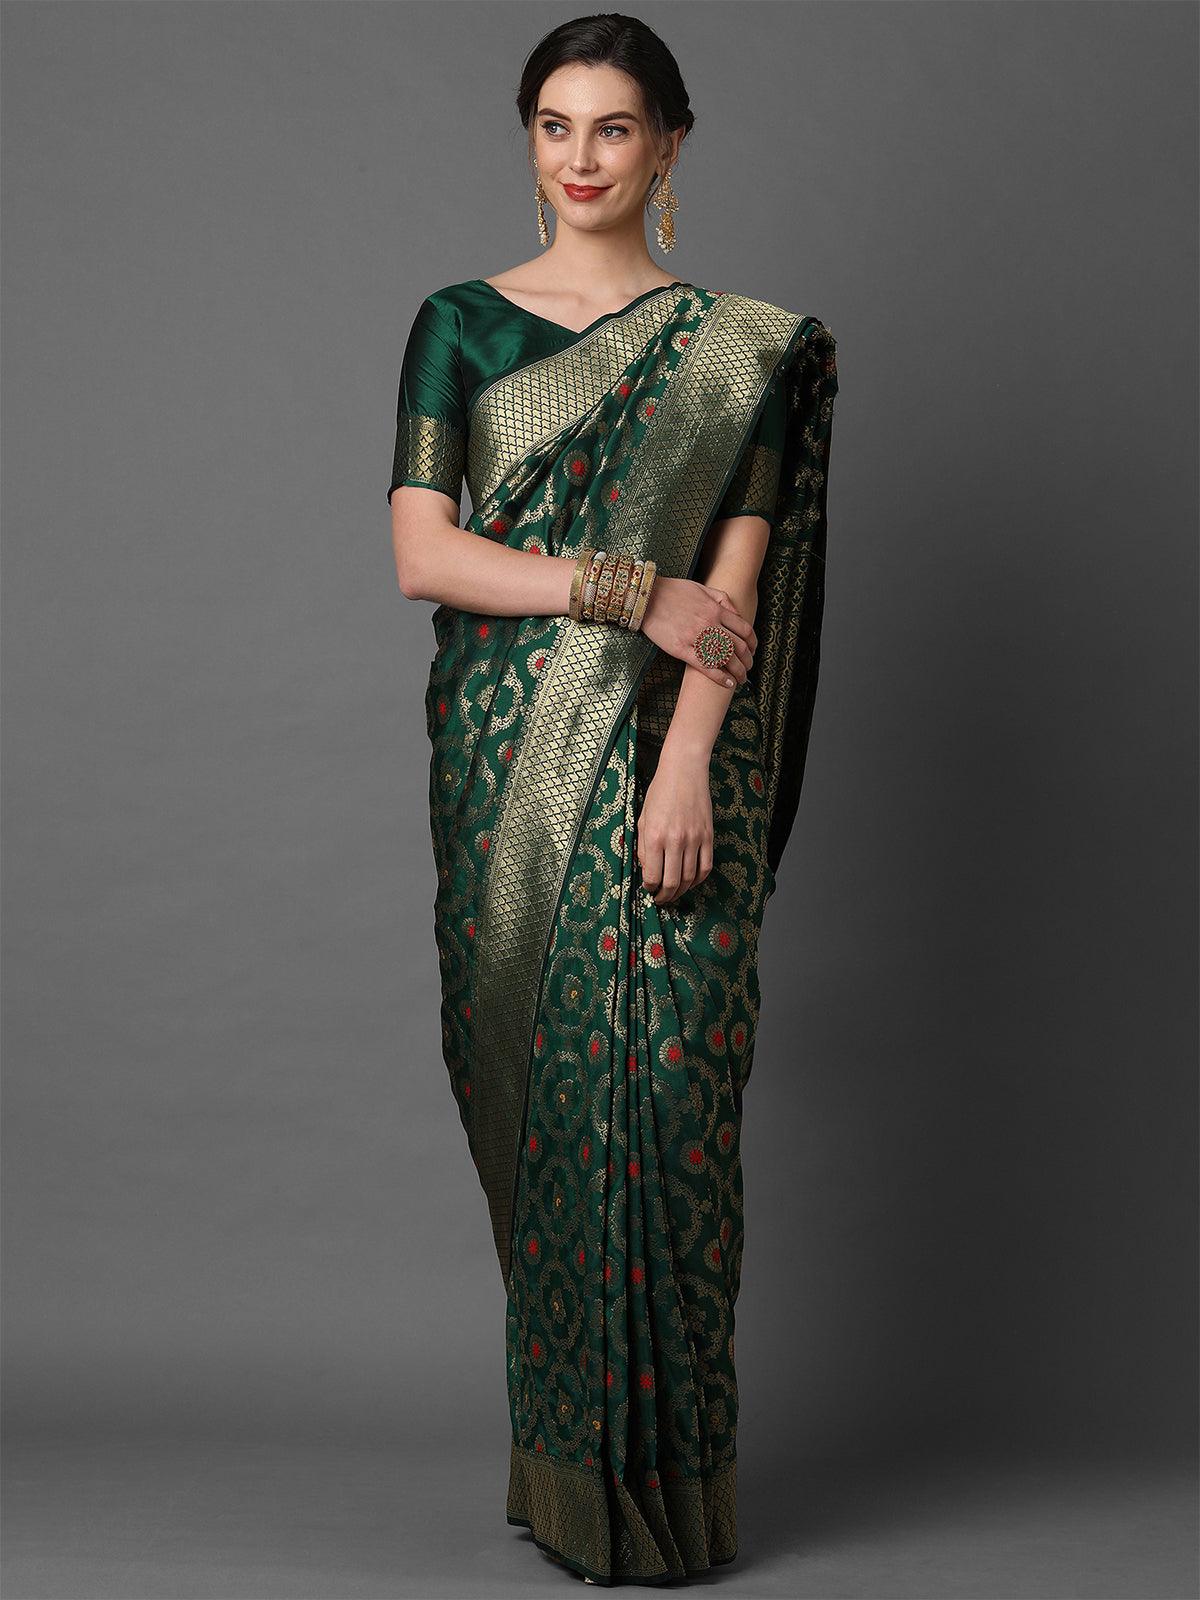 Women's Green Festive Silk Blend Woven Design Saree With Unstitched Blouse - Odette